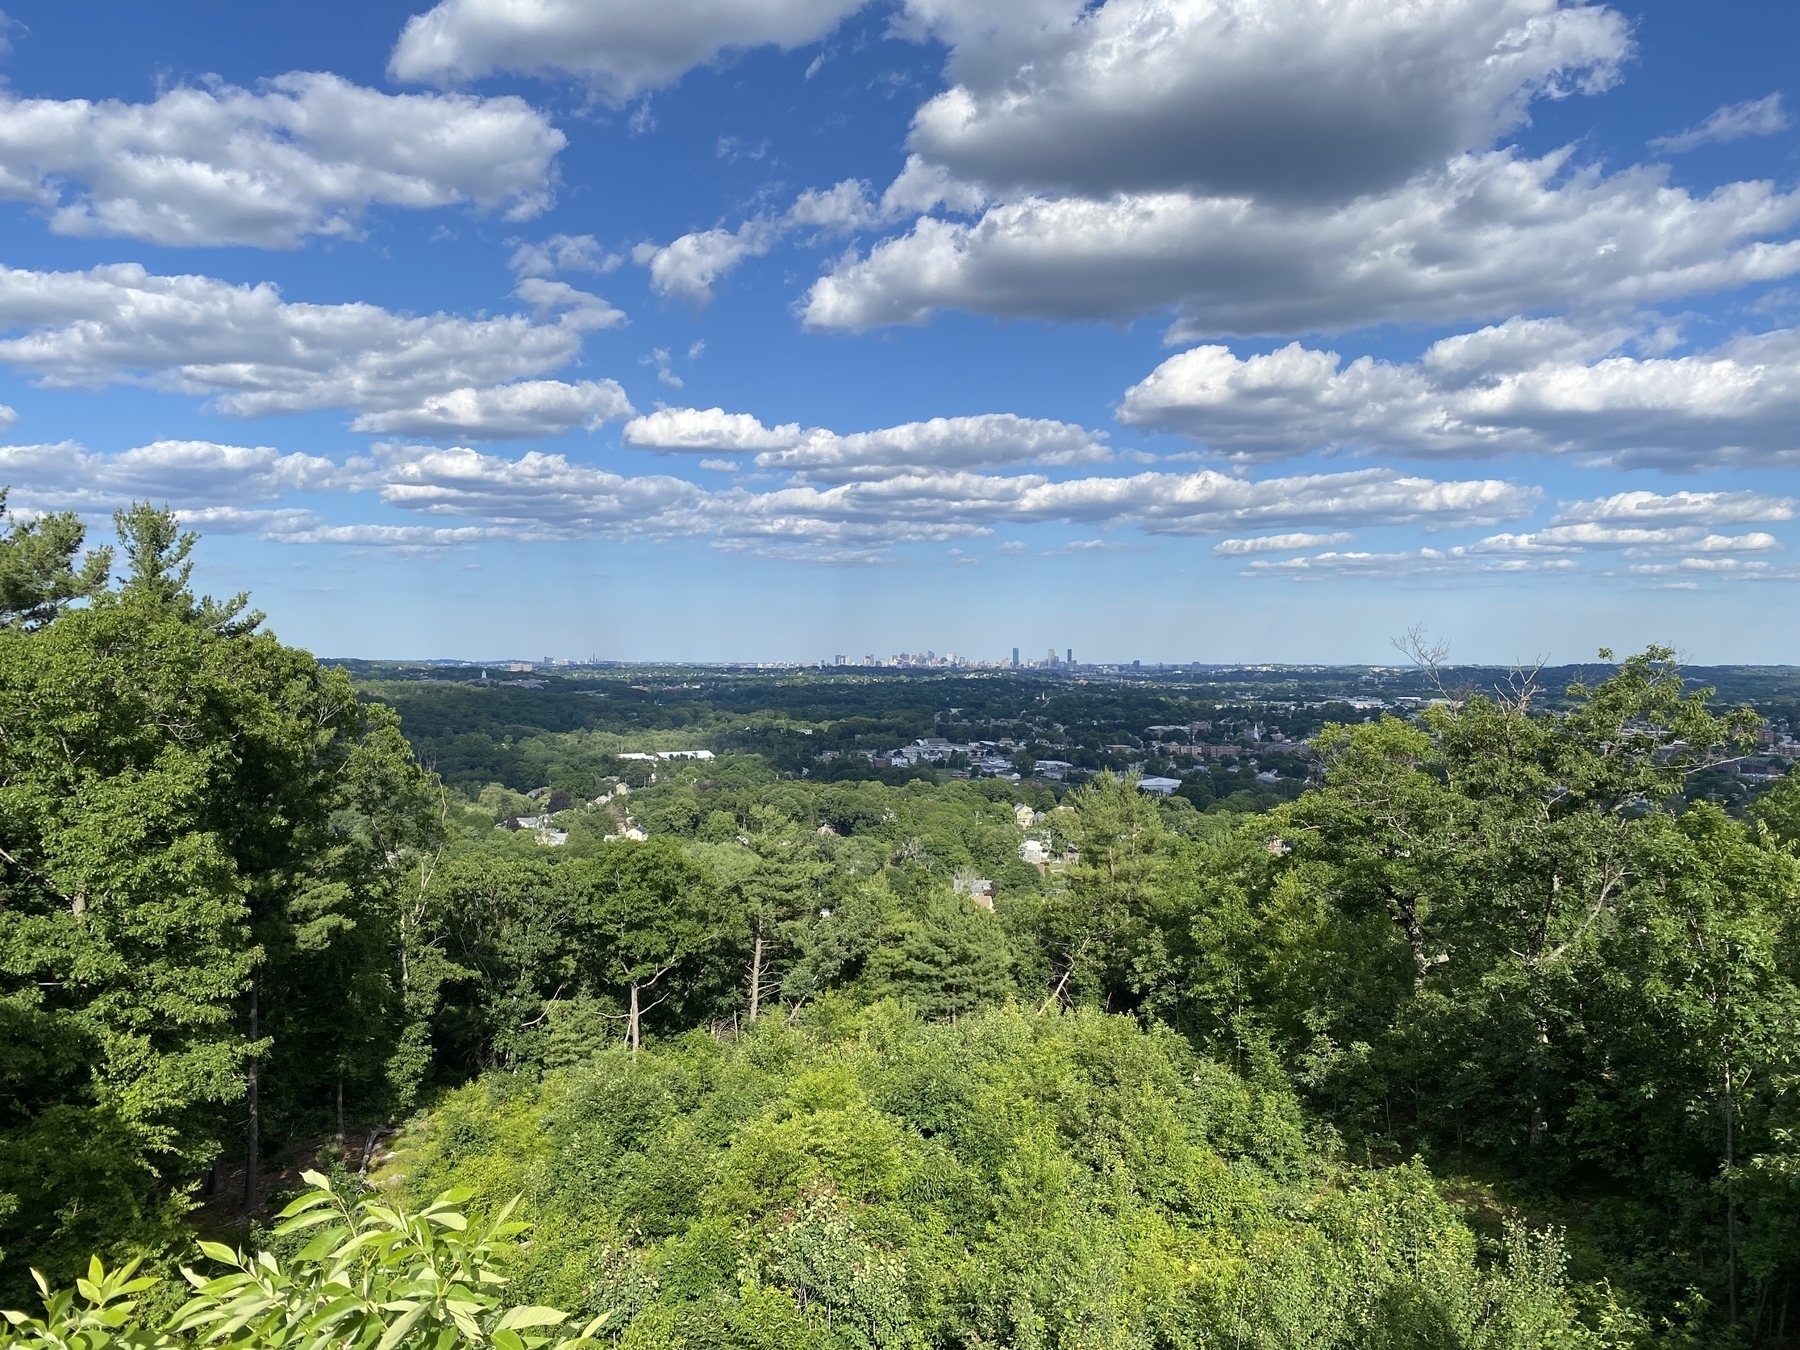 View from a hill overlooking tree lined suburbs, with the Boston skyline in the far distance.